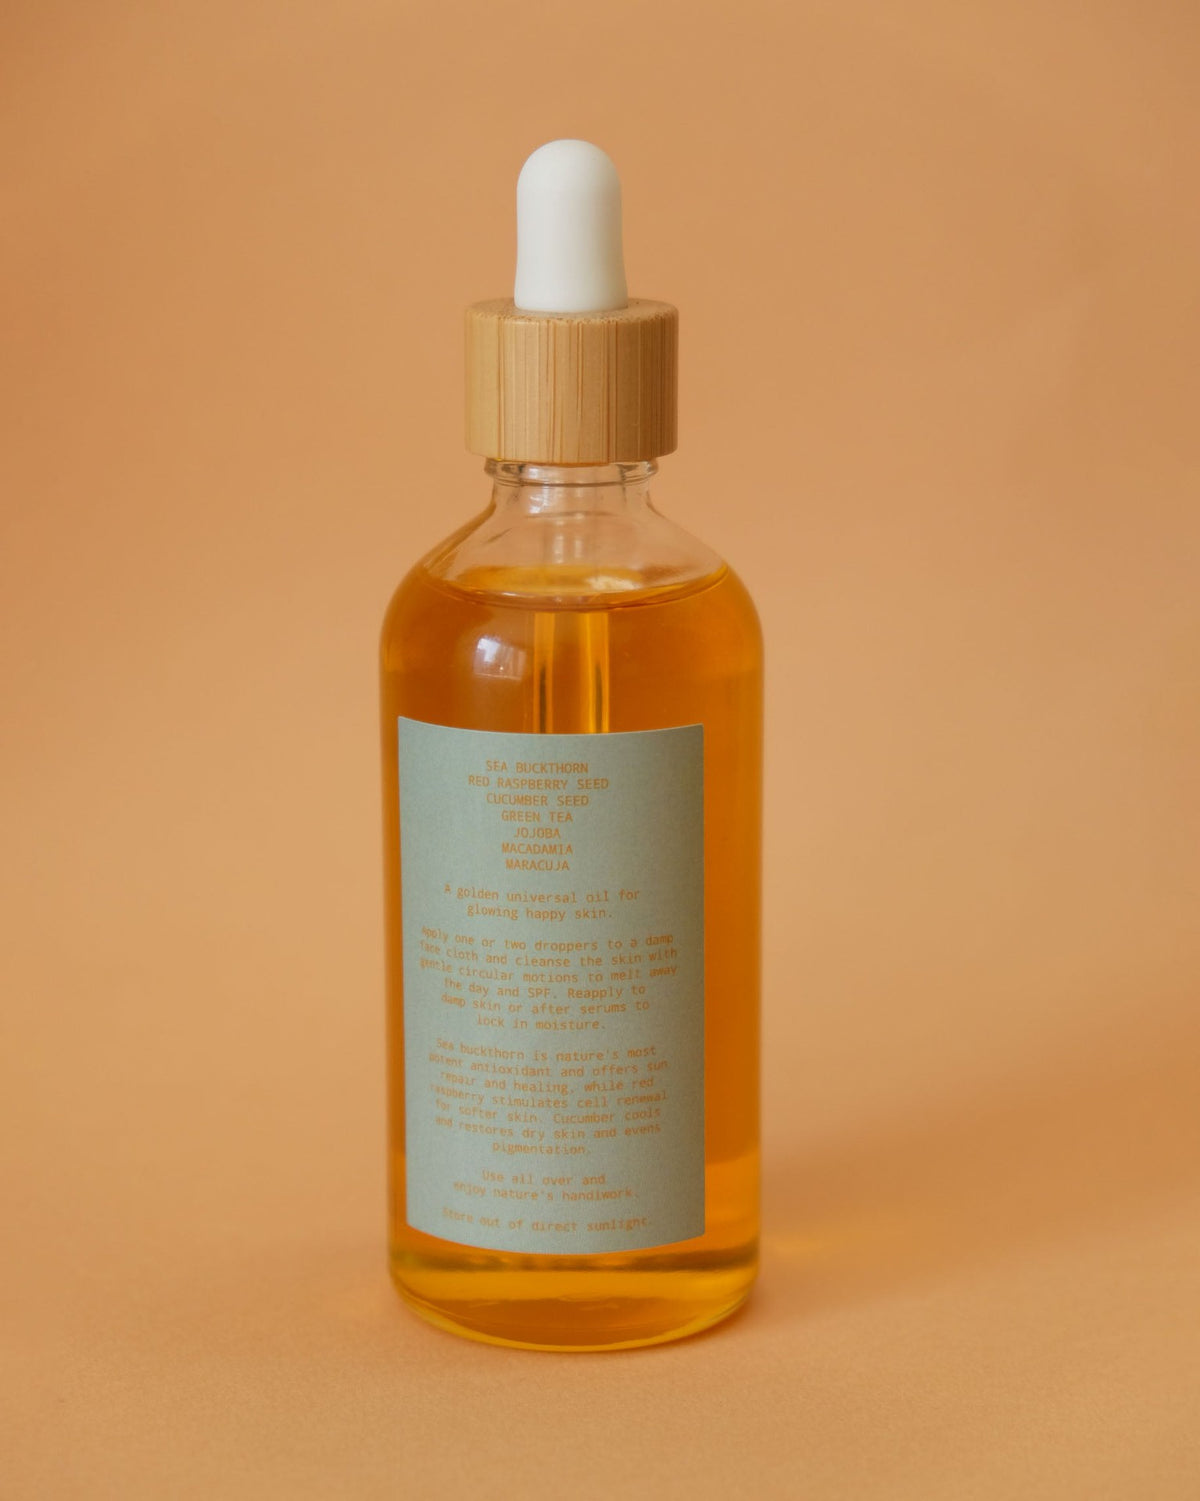 A bottle of Sun Juju Universal Oil – 100𝚐 on a brown background.